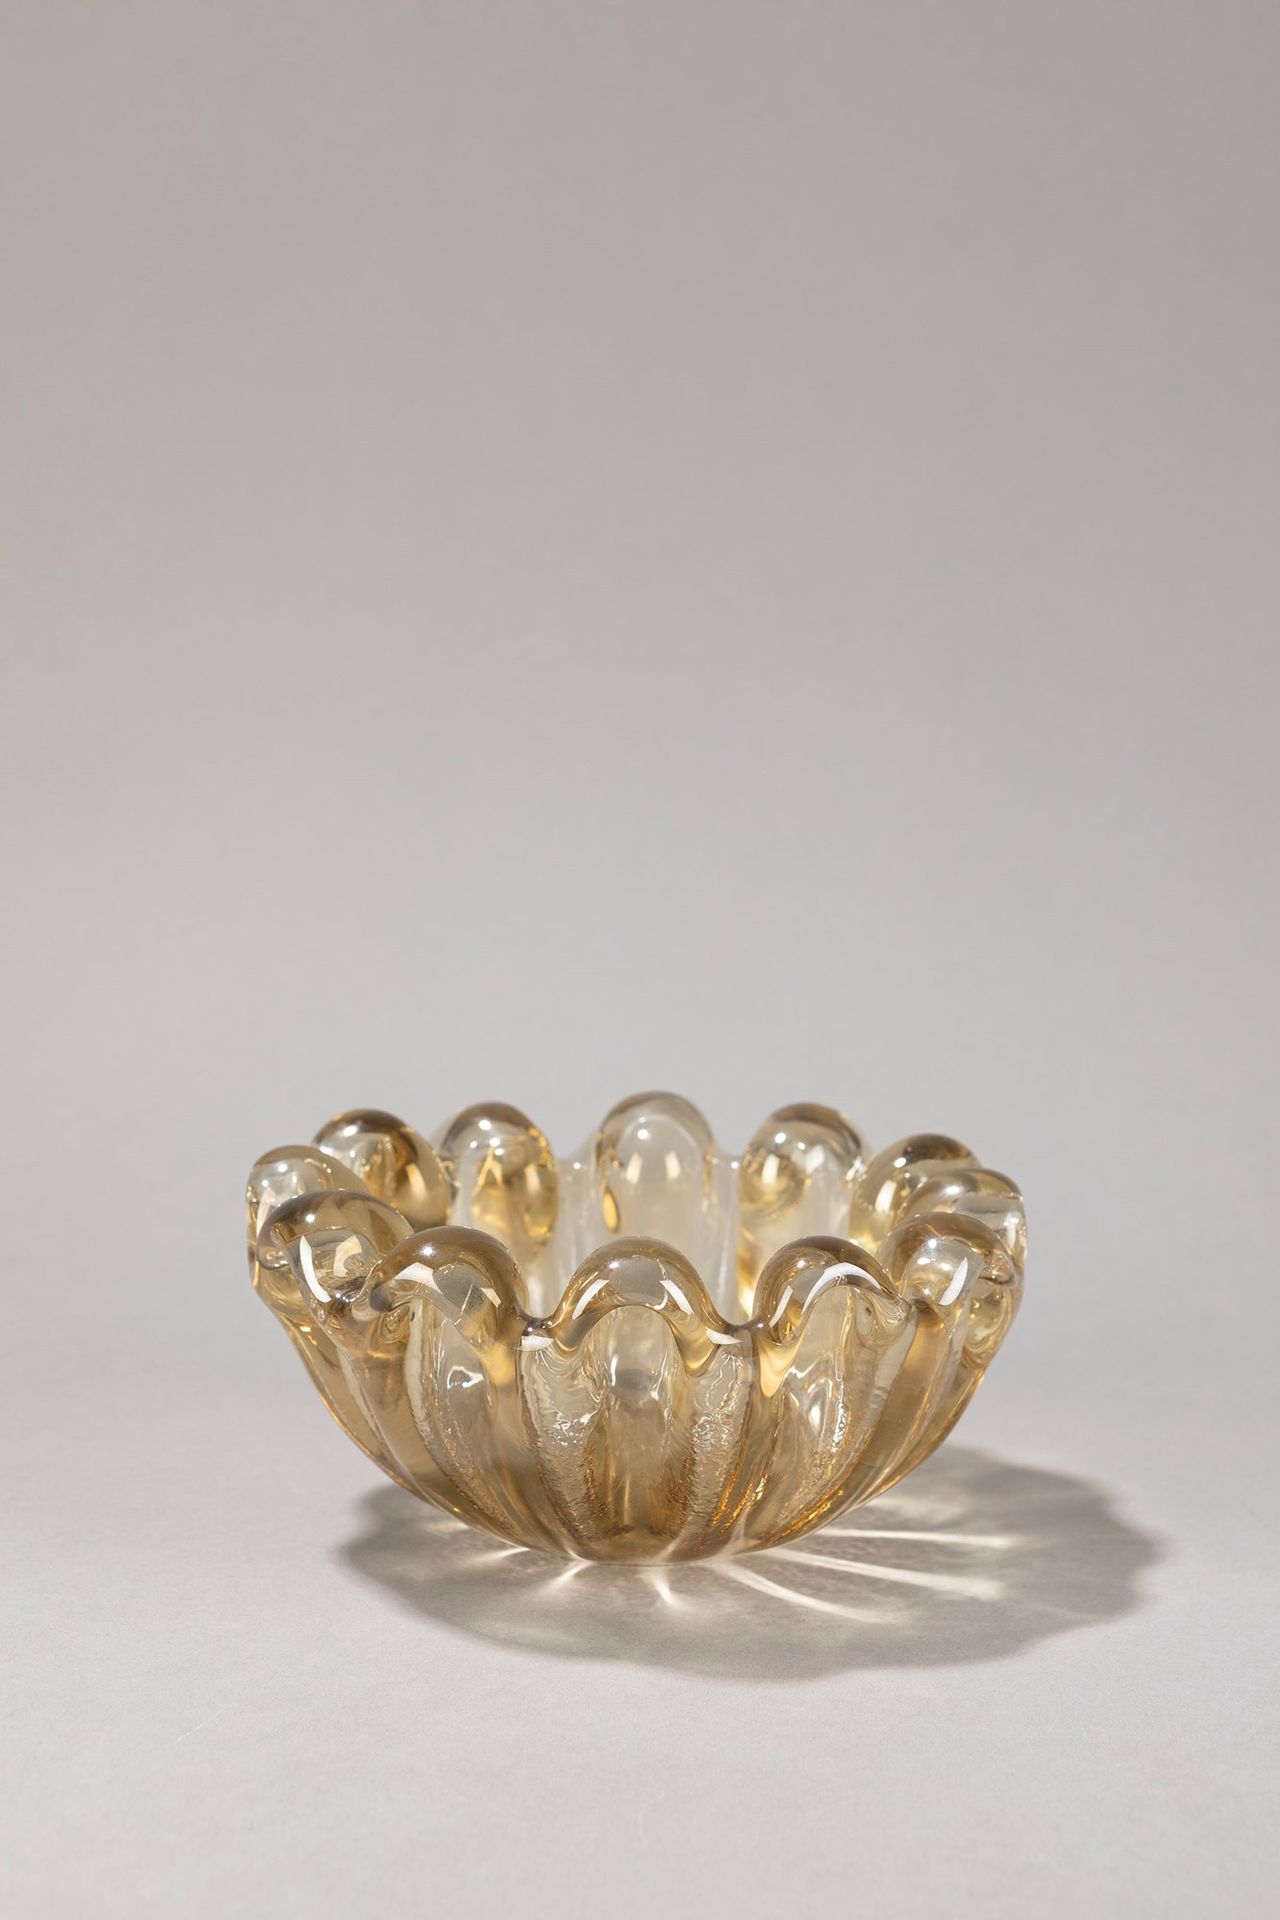 Barovier e Toso Bowl, 1980 ca.

H 8 x 17 cm 
blown glass.

Sign under the base